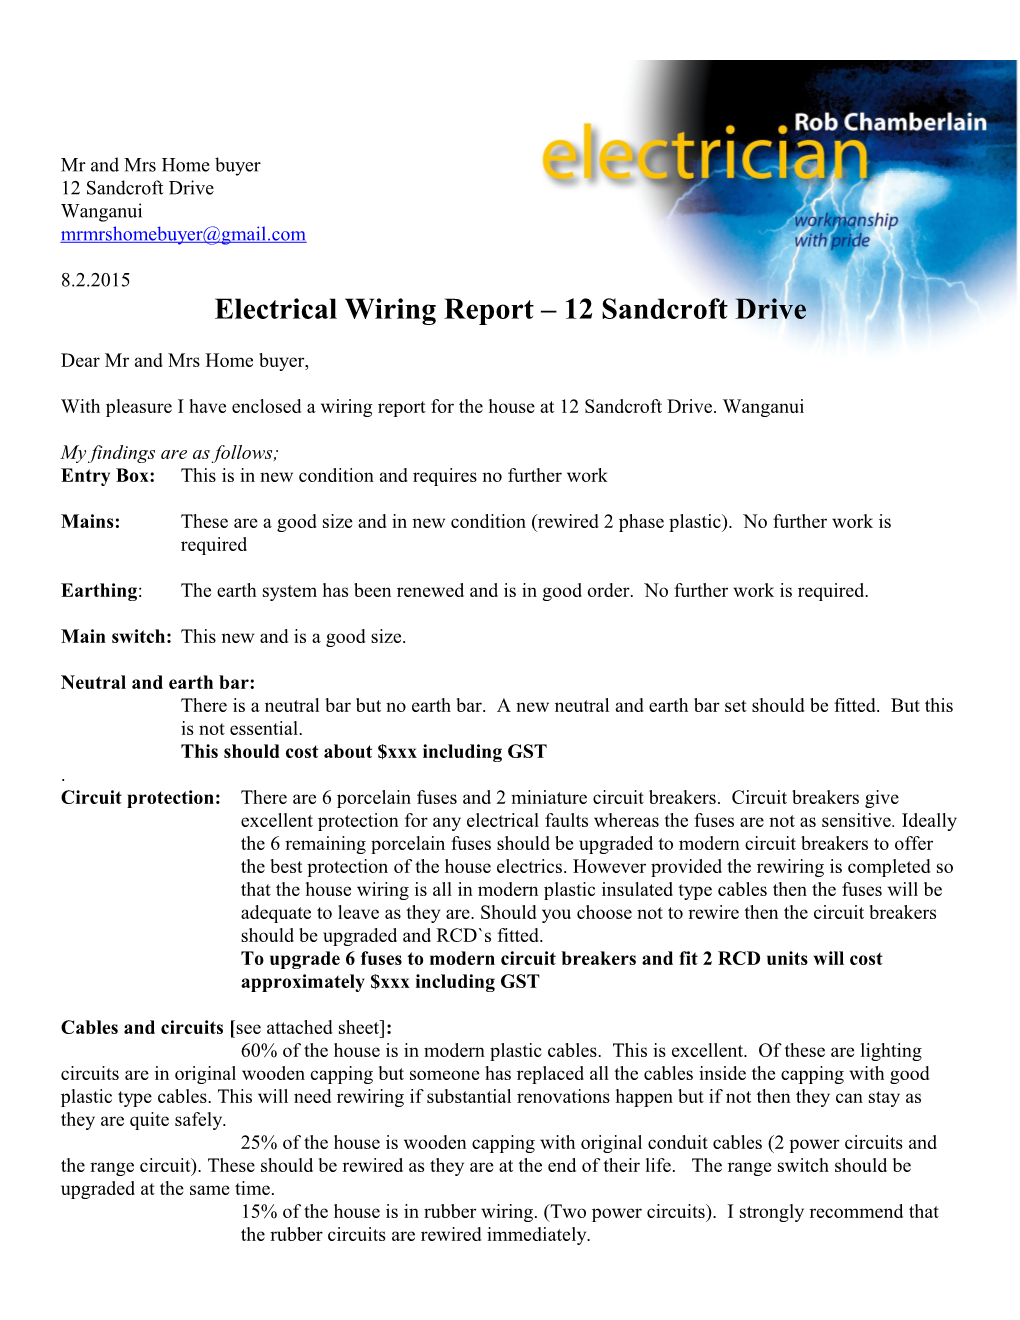 Electrical Wiring Report 12 Sandcroft Drive